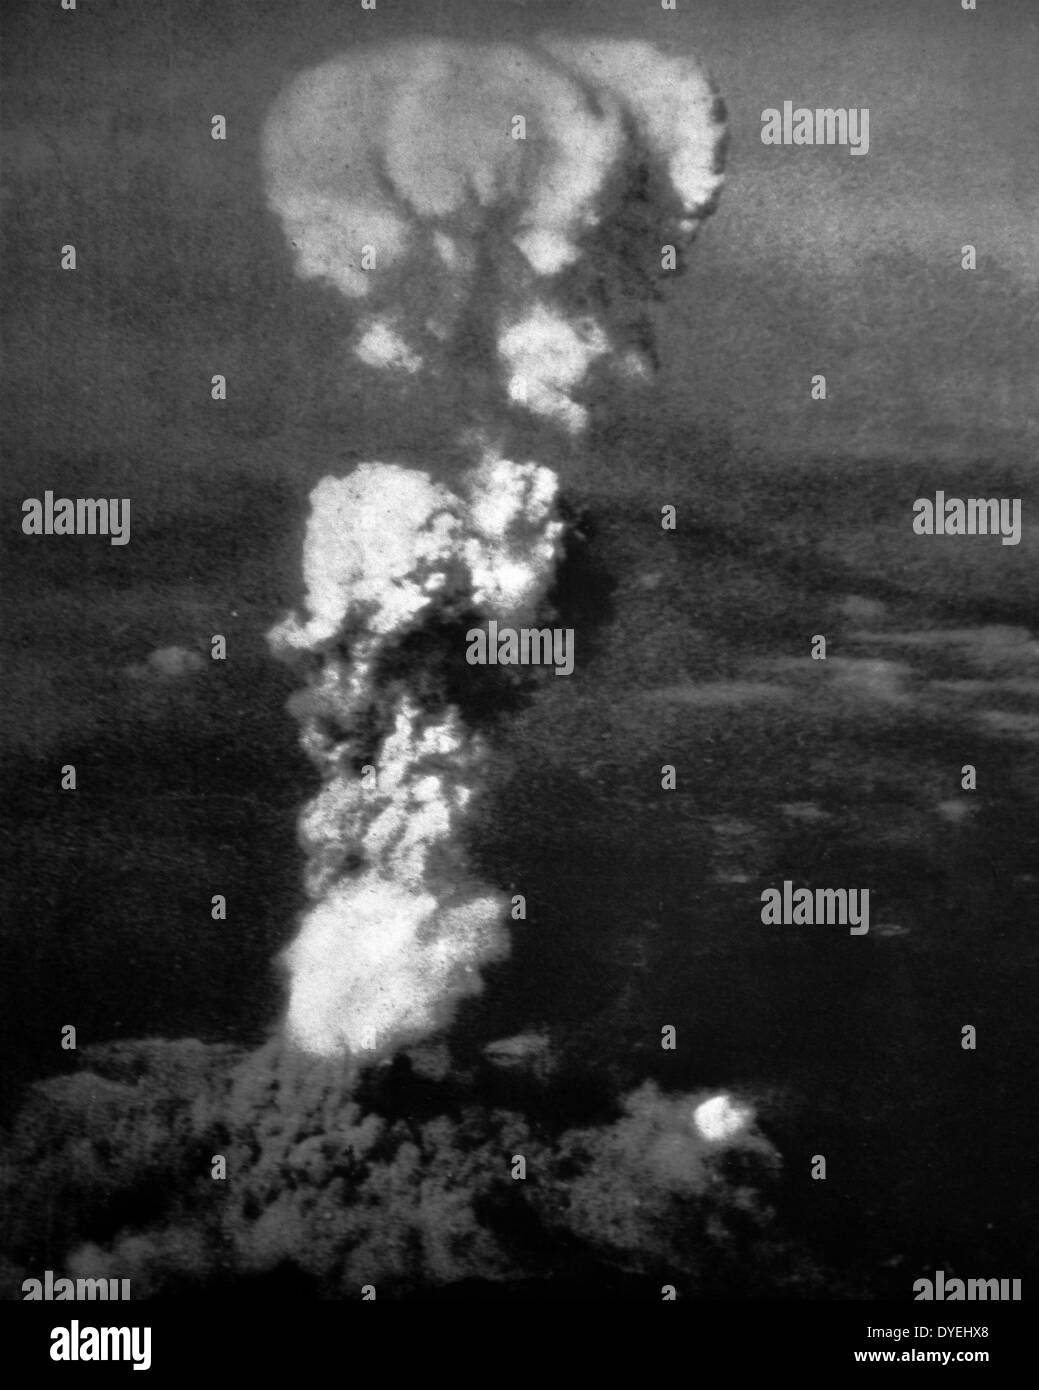 World War II - Atomic bomb, Hiroshima August 1945. The atomic bombings of the cities of Hiroshima and Nagasaki in Japan were conducted by the United States during the final stages of World War II in 11945. The two events are the only use of nuclear weapons in war to date. Stock Photo